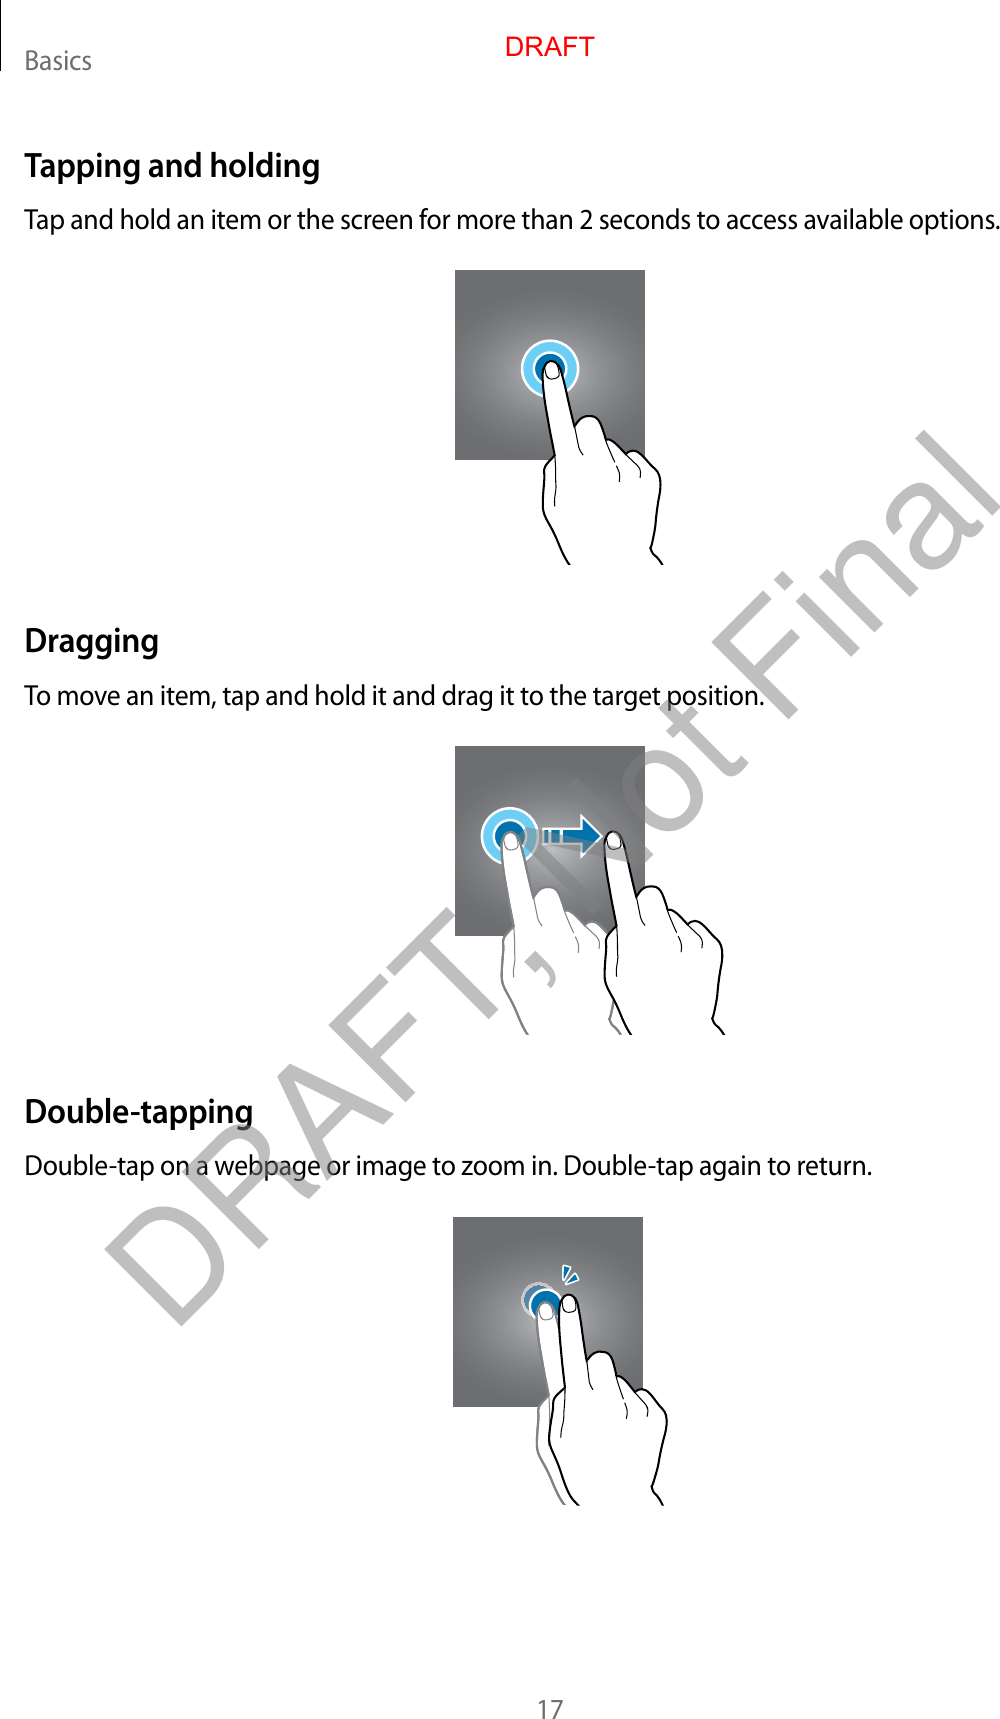 Basics17Tapping and holdingTap and hold an item or the screen for more than 2 seconds to access available options.DraggingTo move an item, tap and hold it and drag it to the target position.Double-tappingDouble-tap on a webpage or image to zoom in. Double-tap again to return.DRAFTDRAFT, Not Final